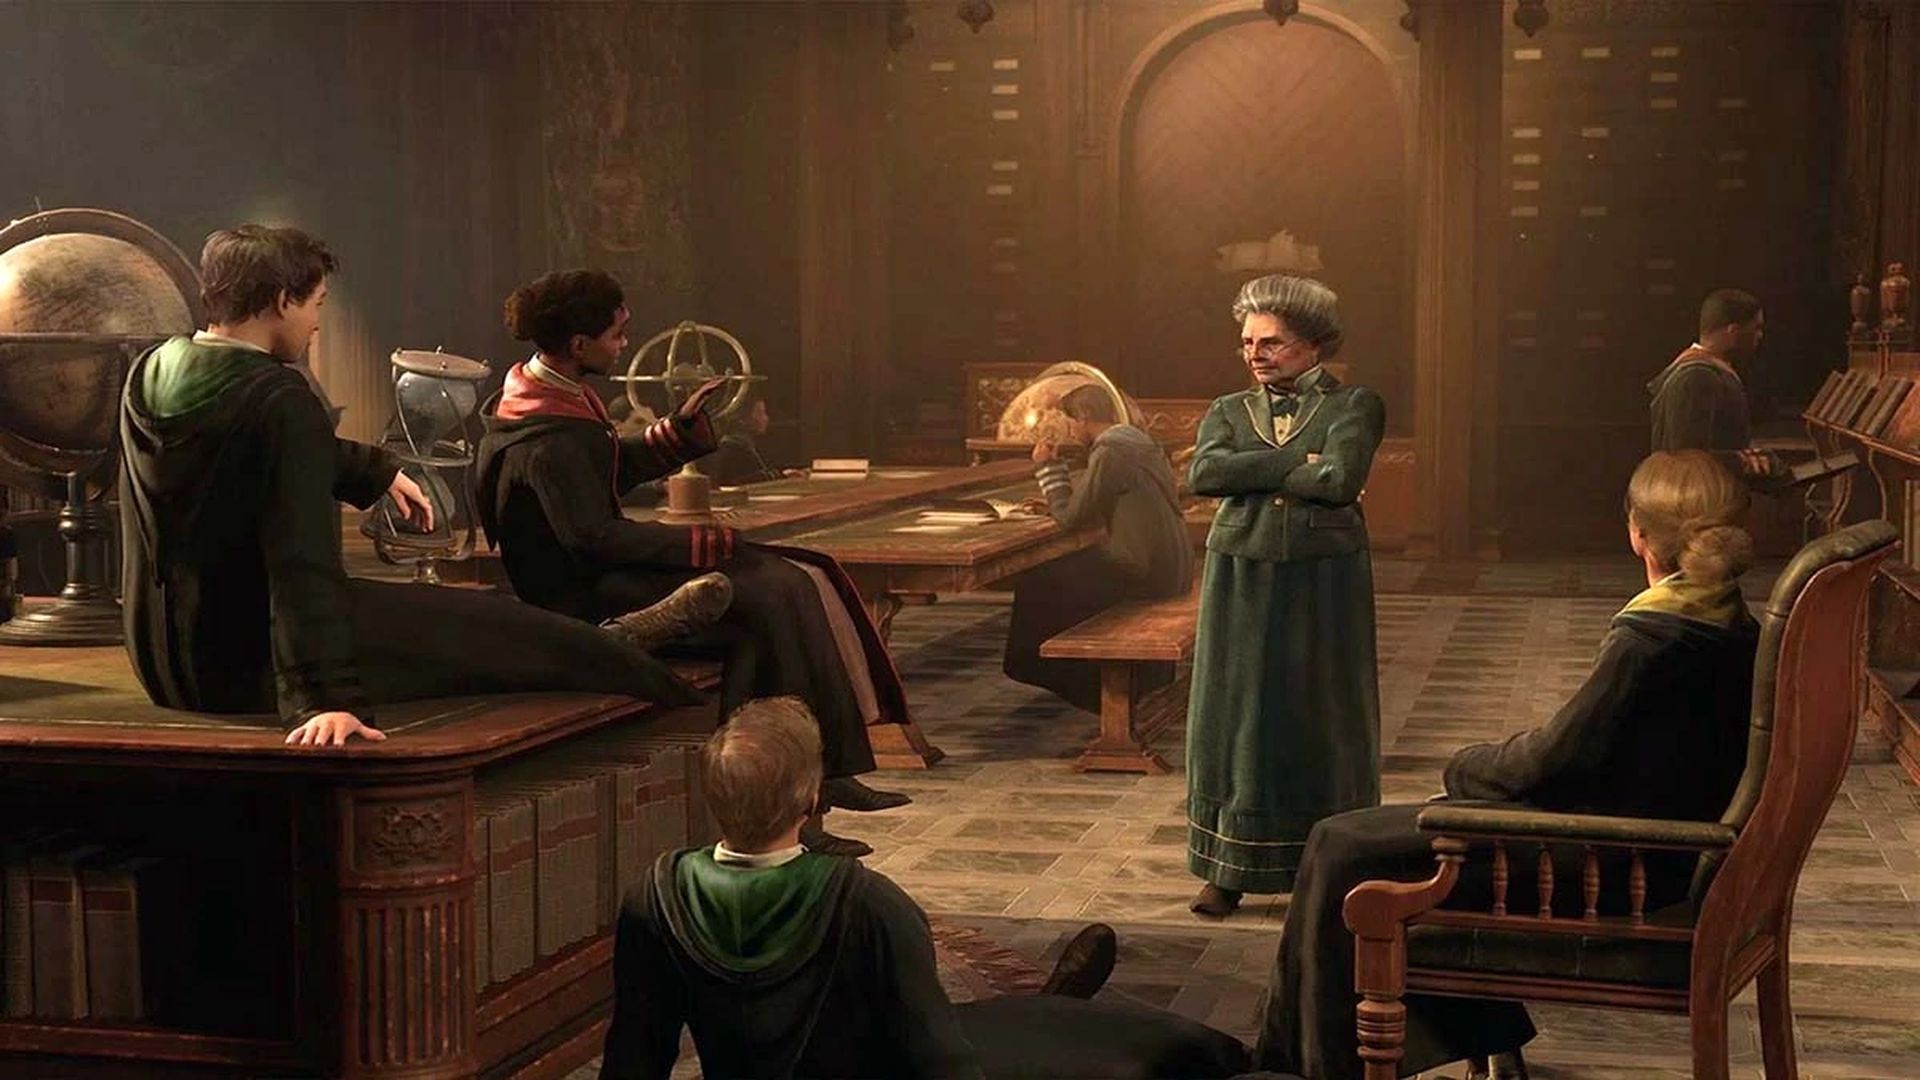 In this guide, we will go over all there is to know about the Hogwarts Legacy Secrets of the Restricted Section questline, so you can complete it without any...